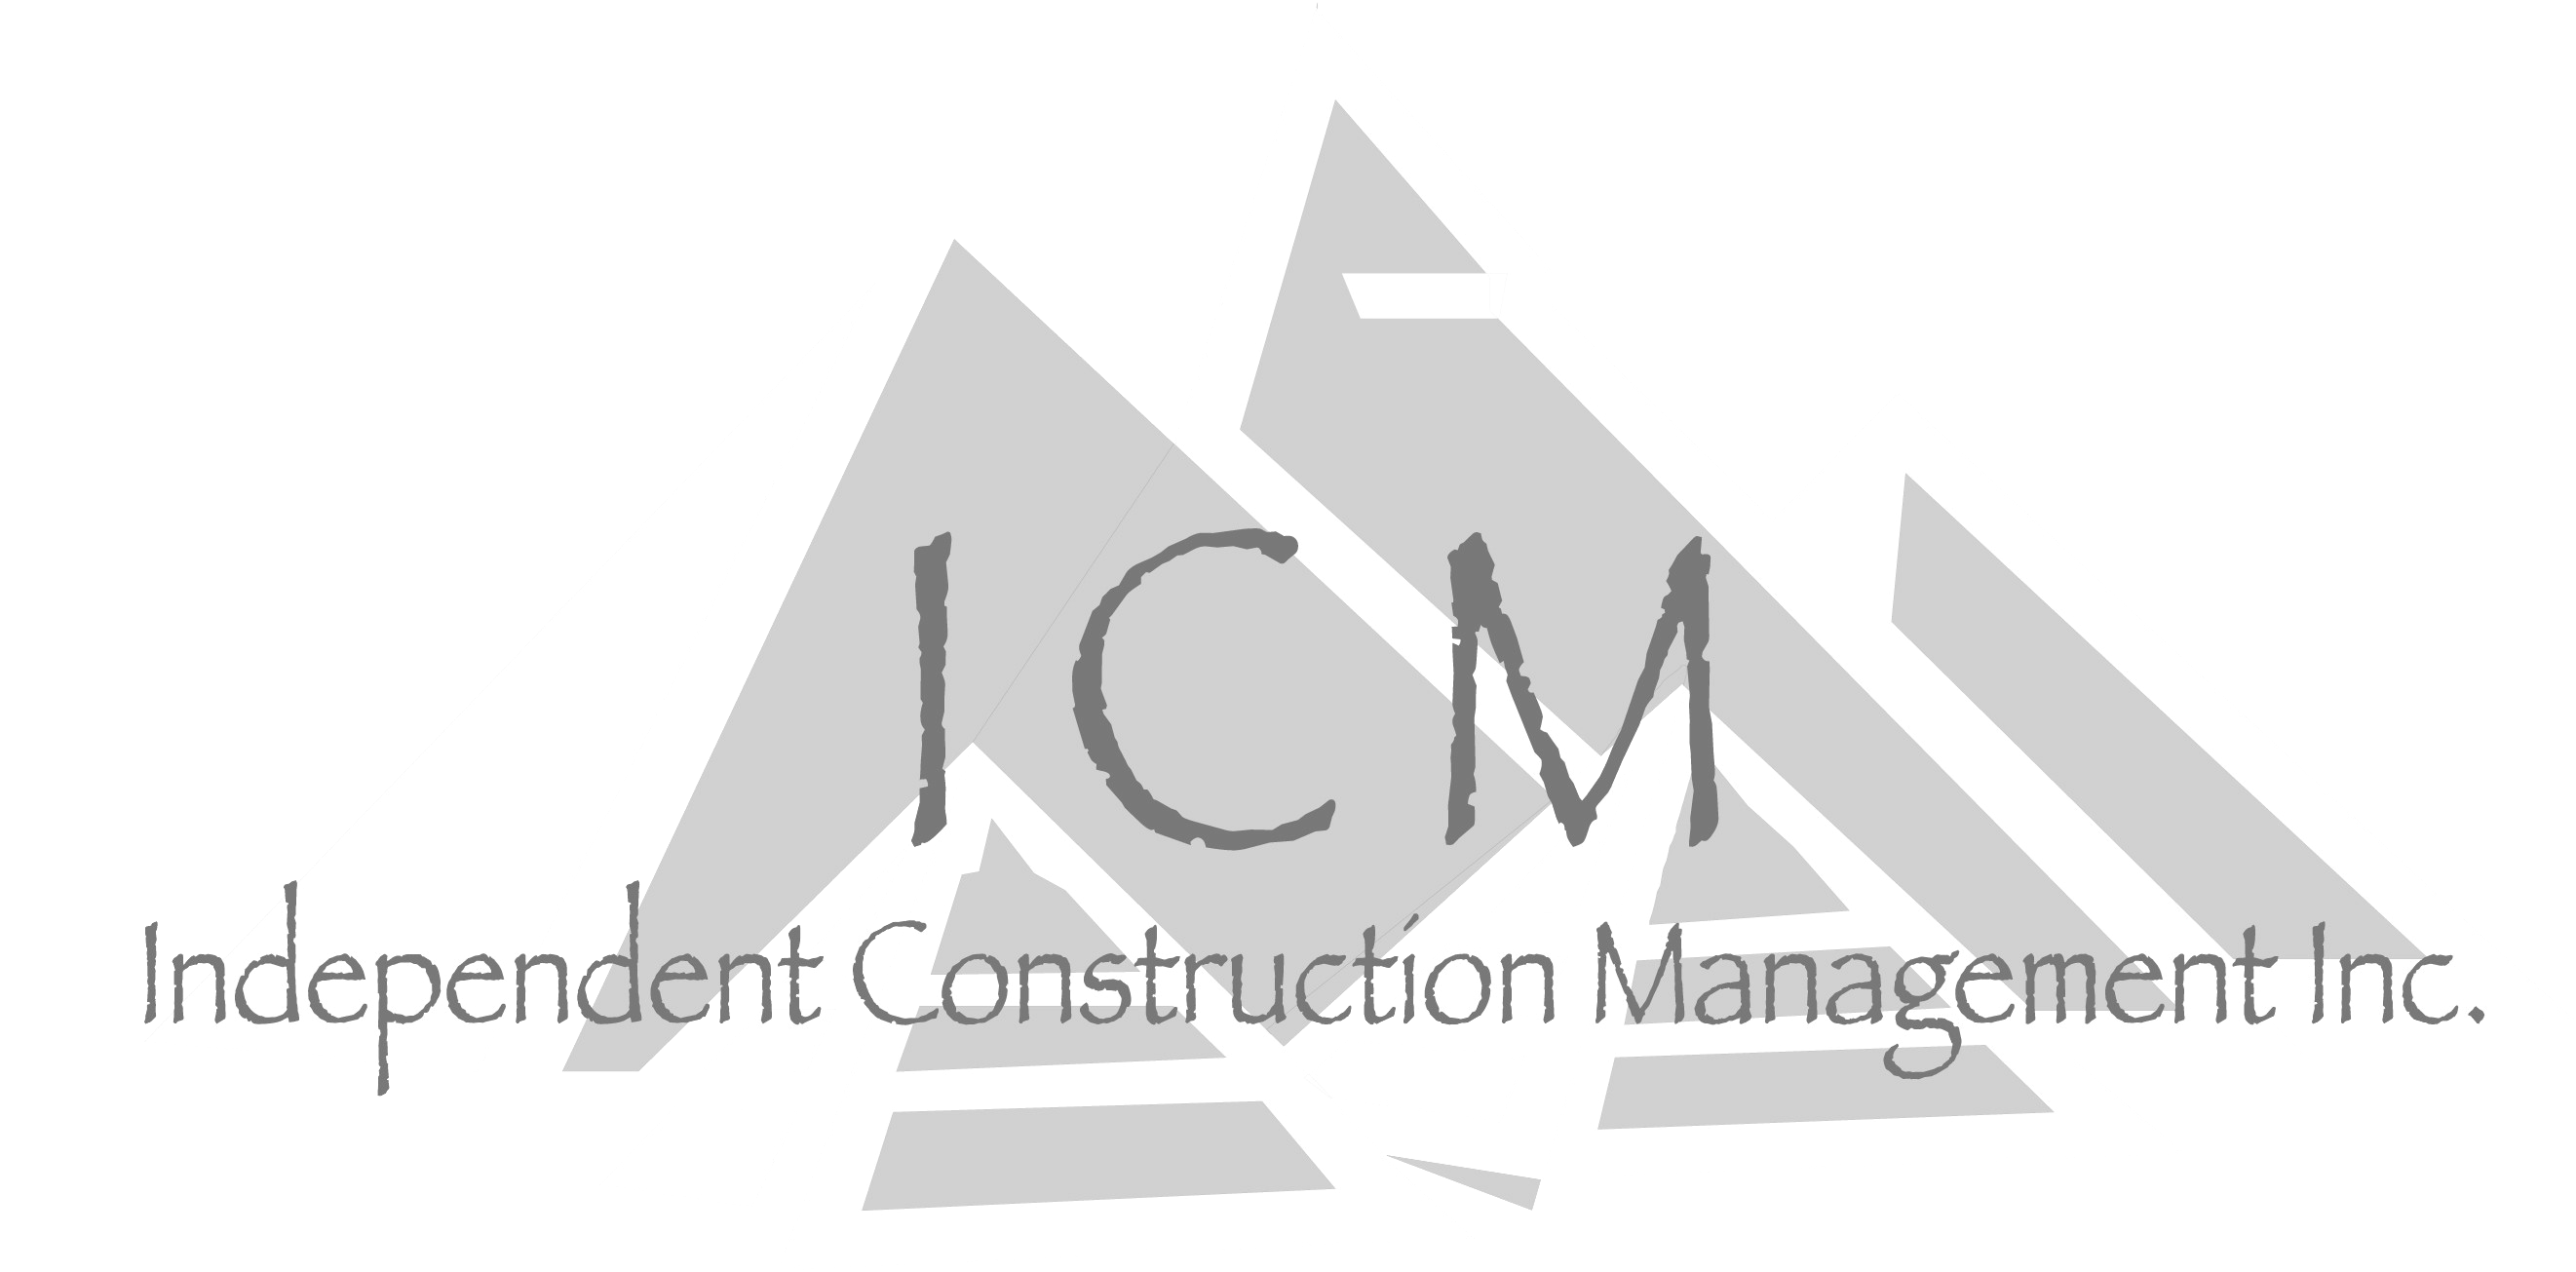 Independent Construction Management Inc White